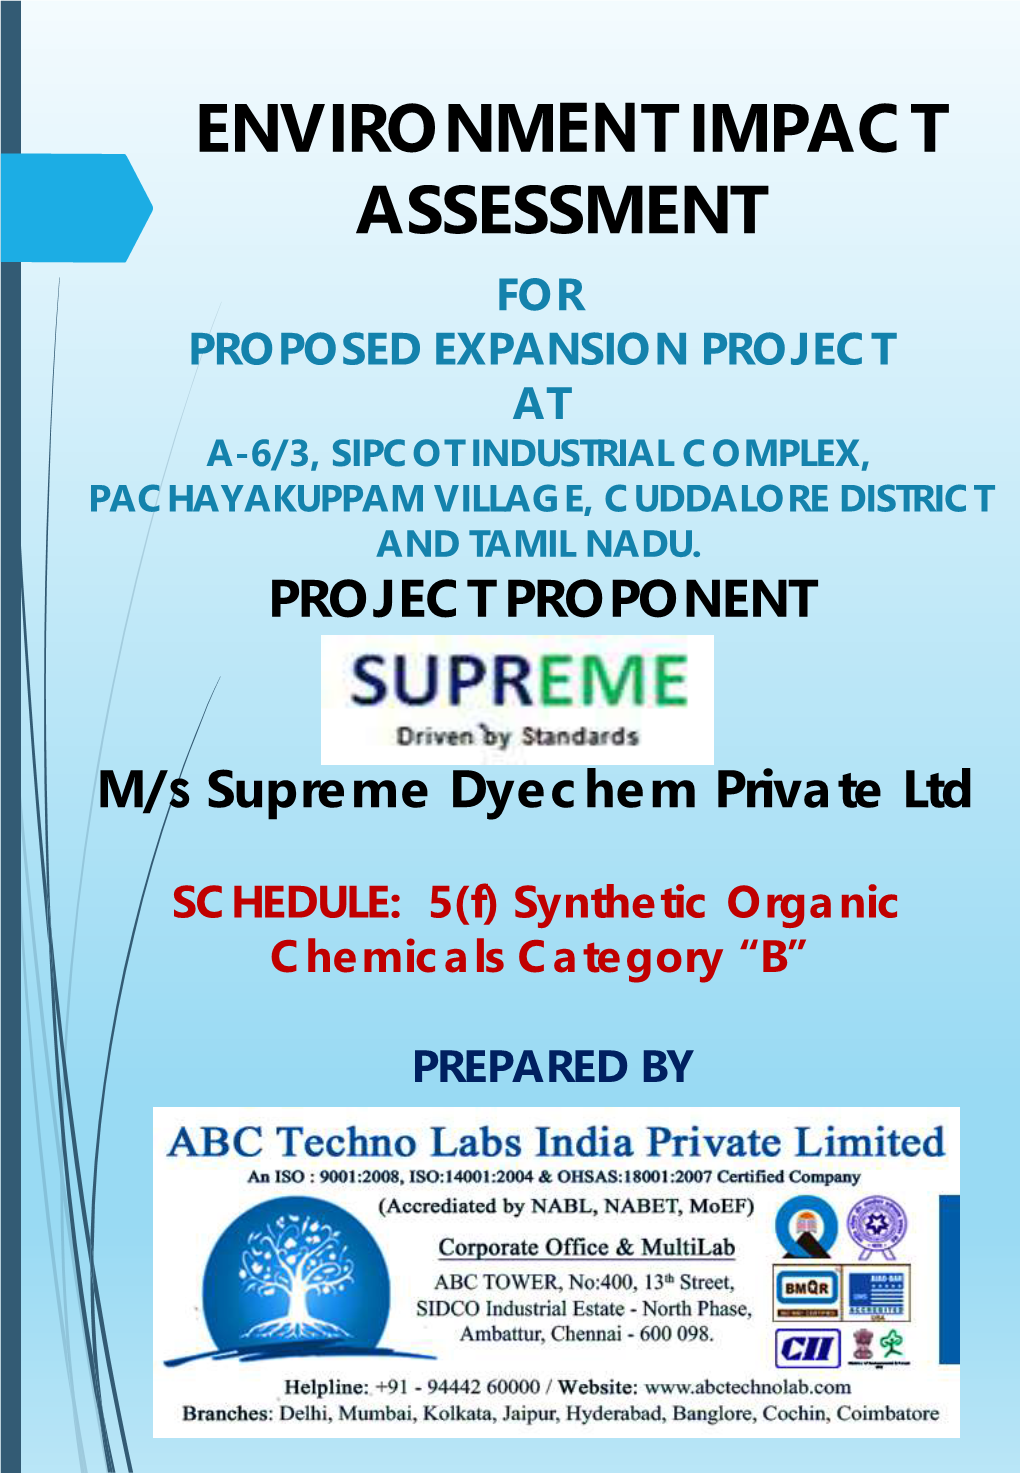 Environment Impact Assessment for Proposed Expansion Project at A-6/3, Sipcot Industrial Complex, Pachayakuppam Village, Cuddalore District and Tamil Nadu